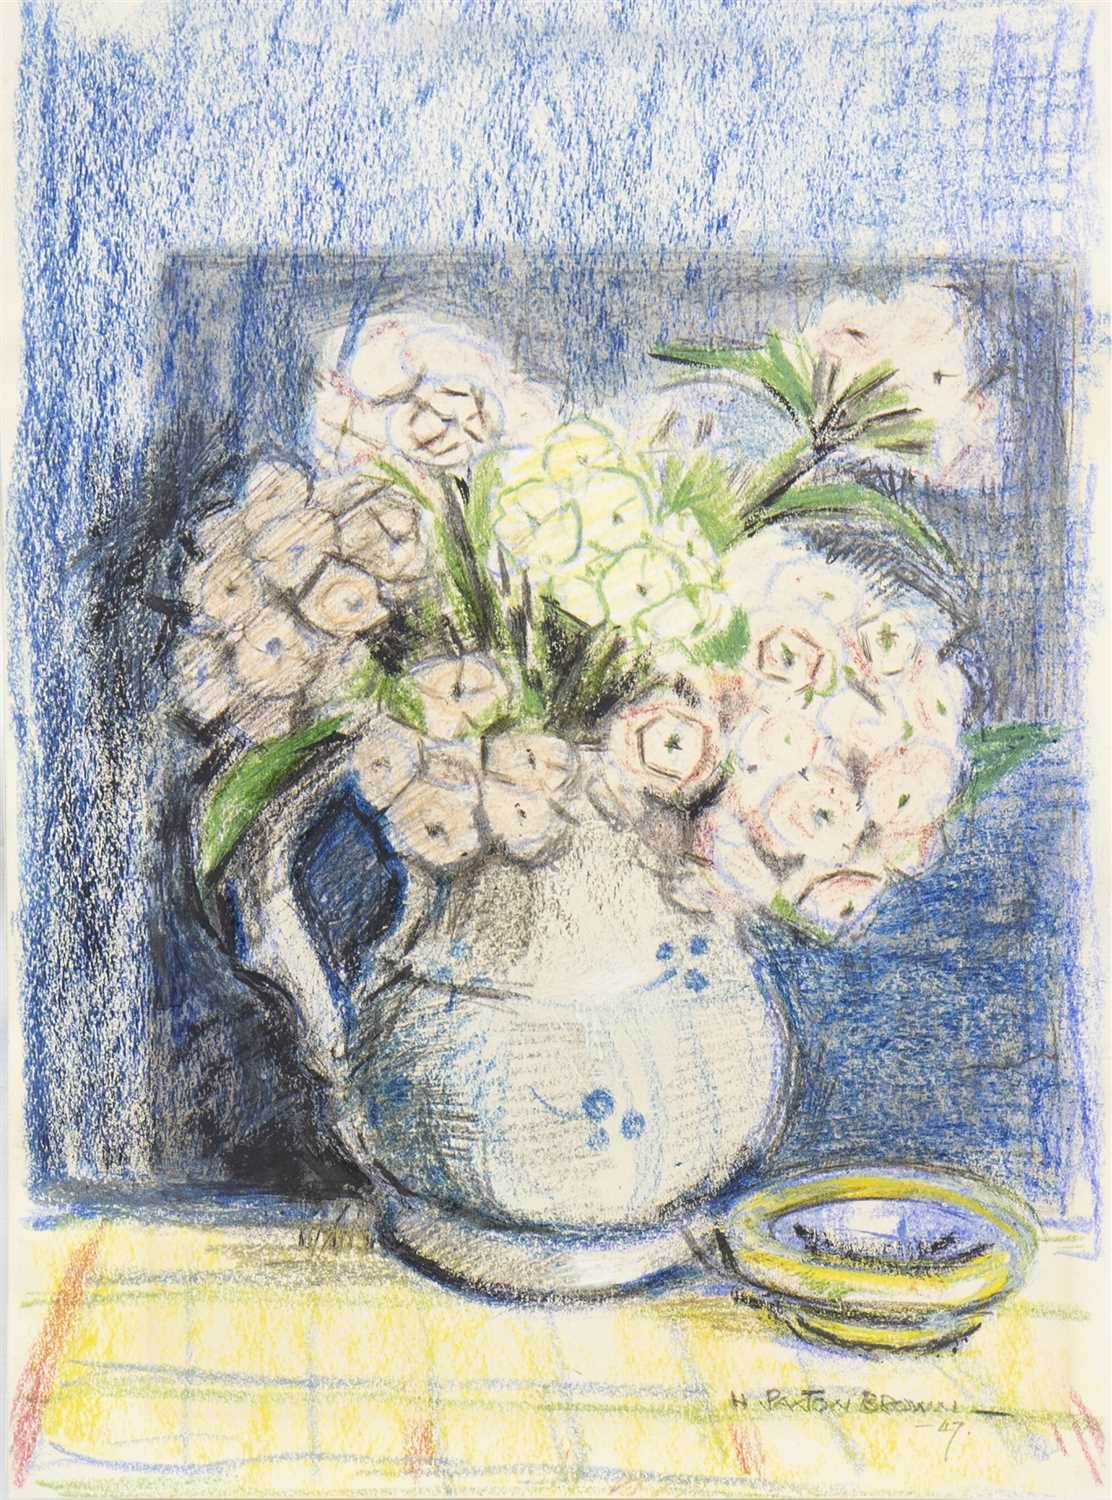 Lot 624 - STILL LIFE WITH FLOWERS IN A JUG, A PASTEL BY HELEN PAXTON BROWN